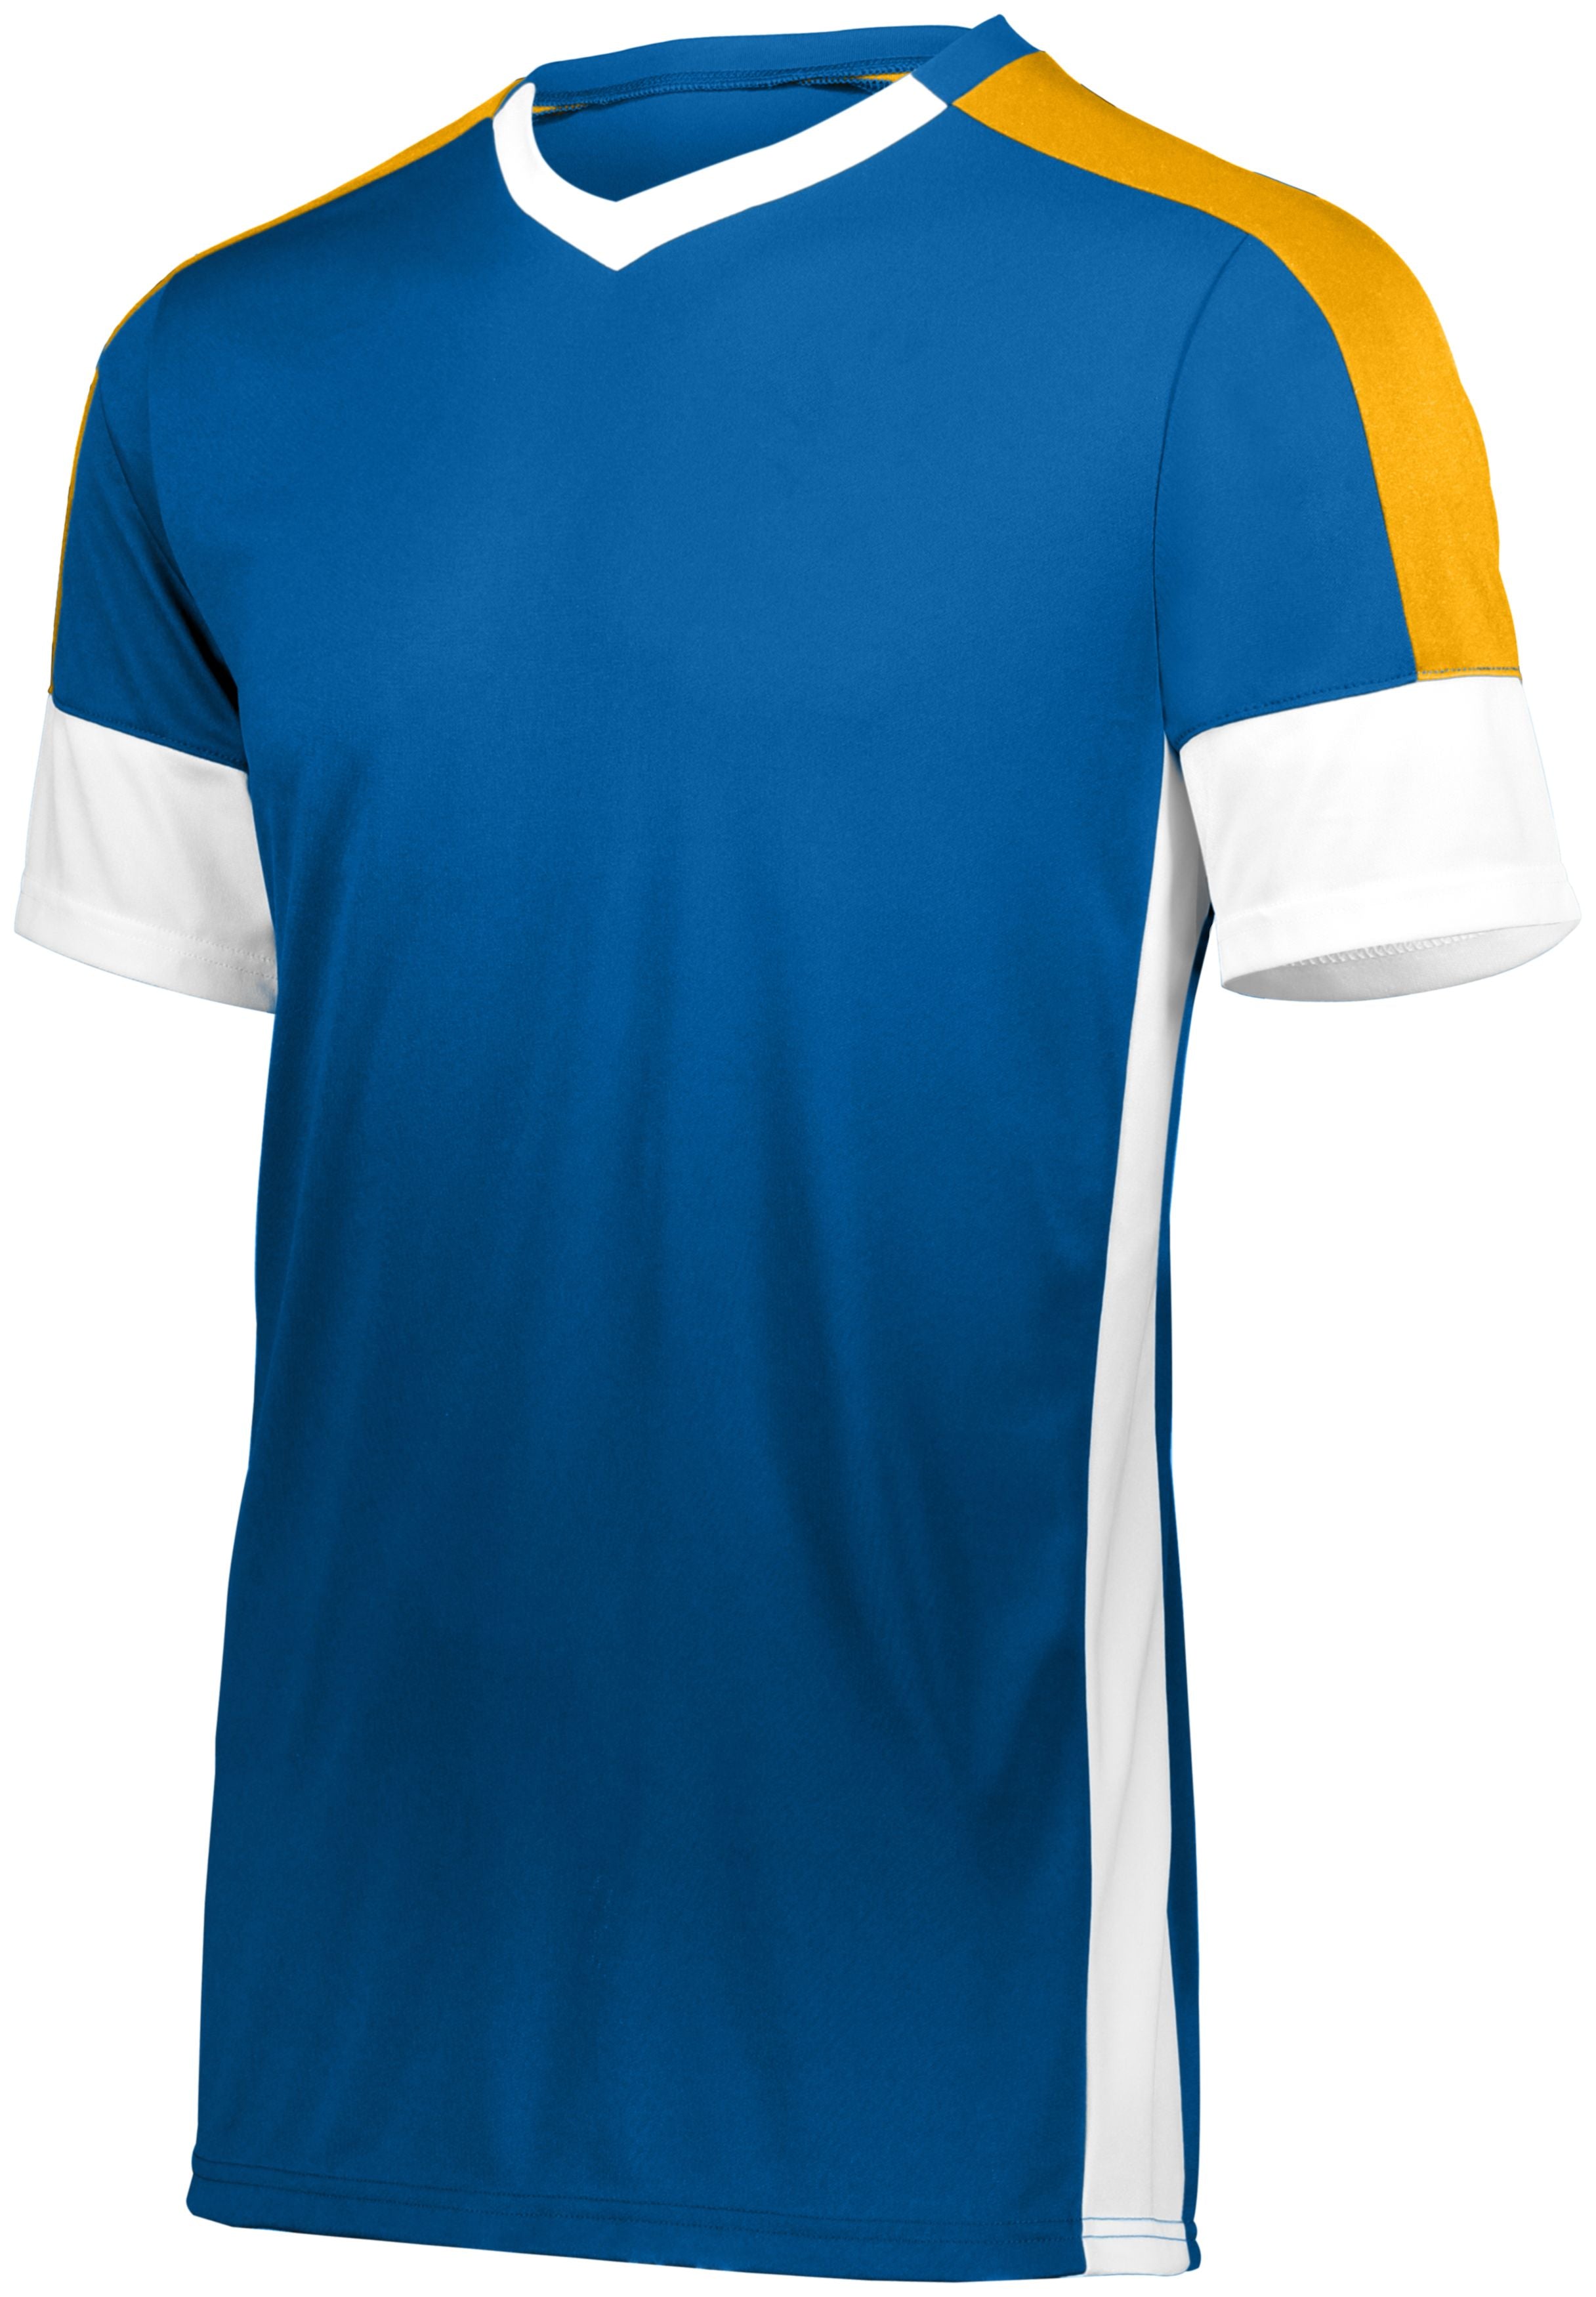 High 5 Youth Wembley Soccer Jersey in Royal/White/Athletic Gold  -Part of the Youth, Youth-Jersey, High5-Products, Soccer, Shirts, All-Sports-1 product lines at KanaleyCreations.com